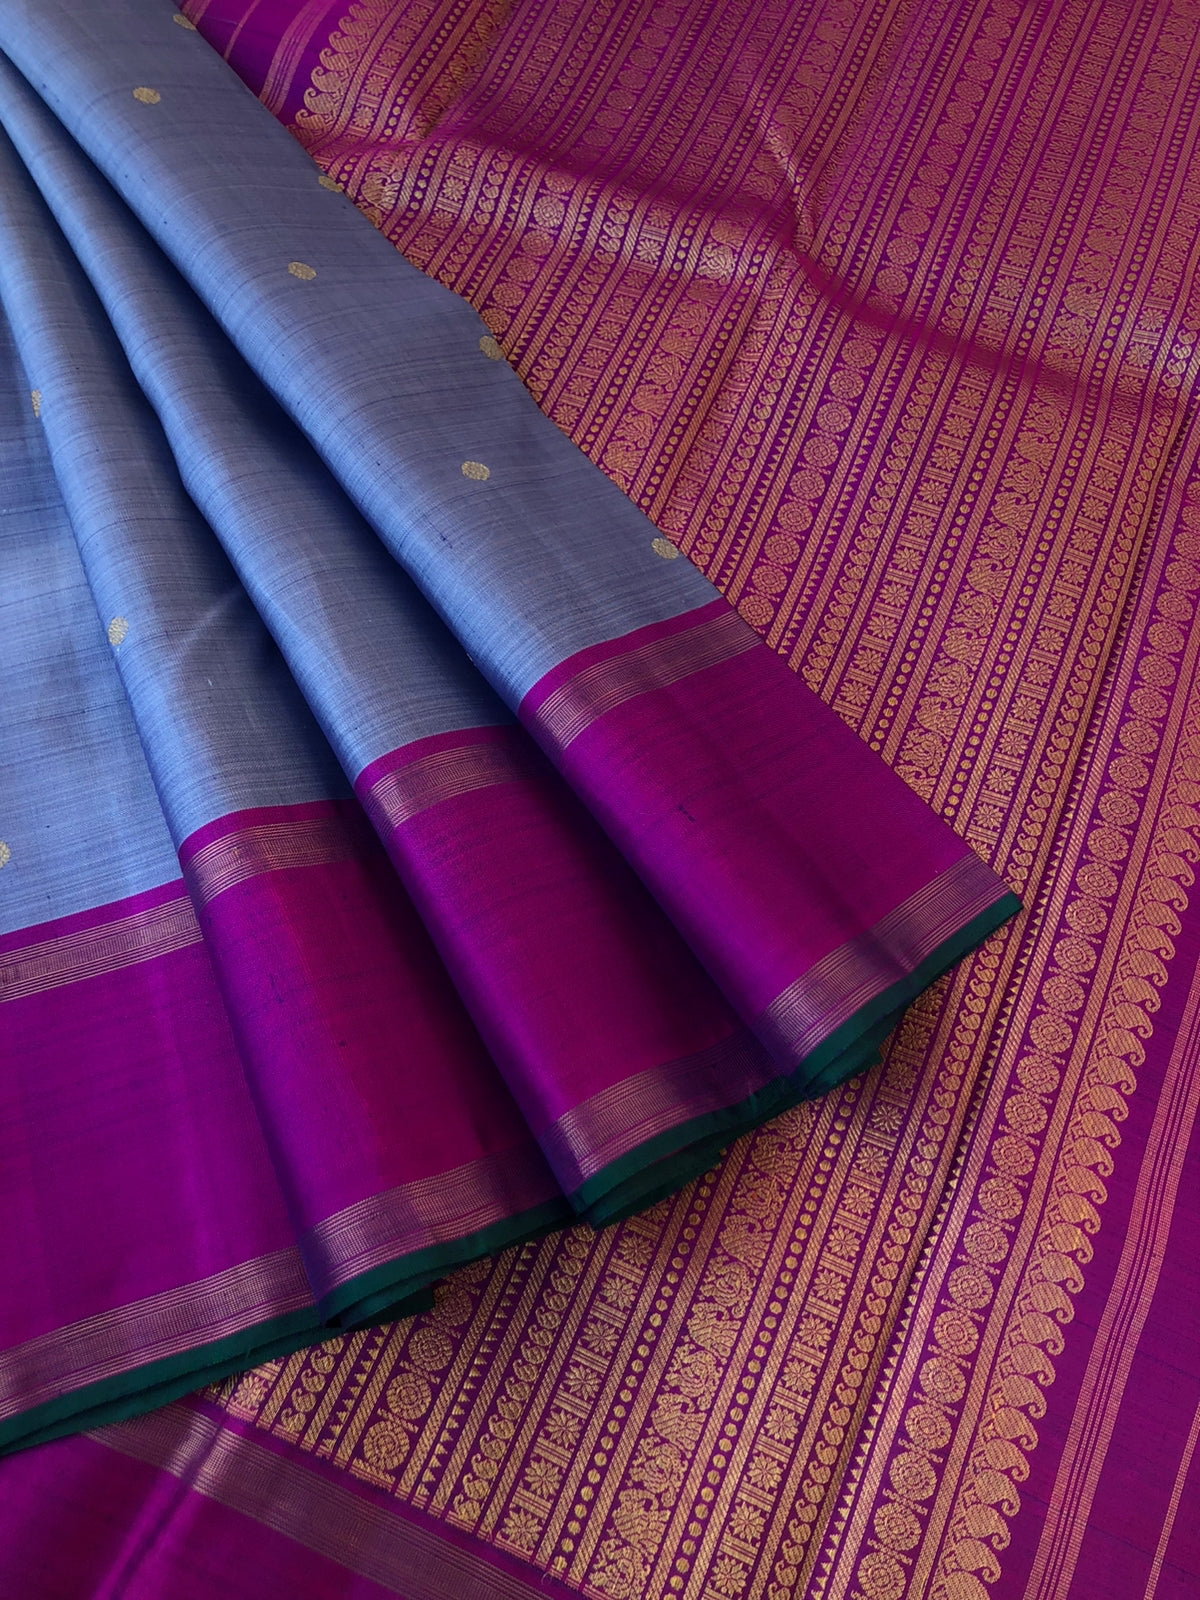 Kaviyam on Kanchivaram - blue short steel gray with majenta borders pallu and blouse, the details Over the pallu is the best part